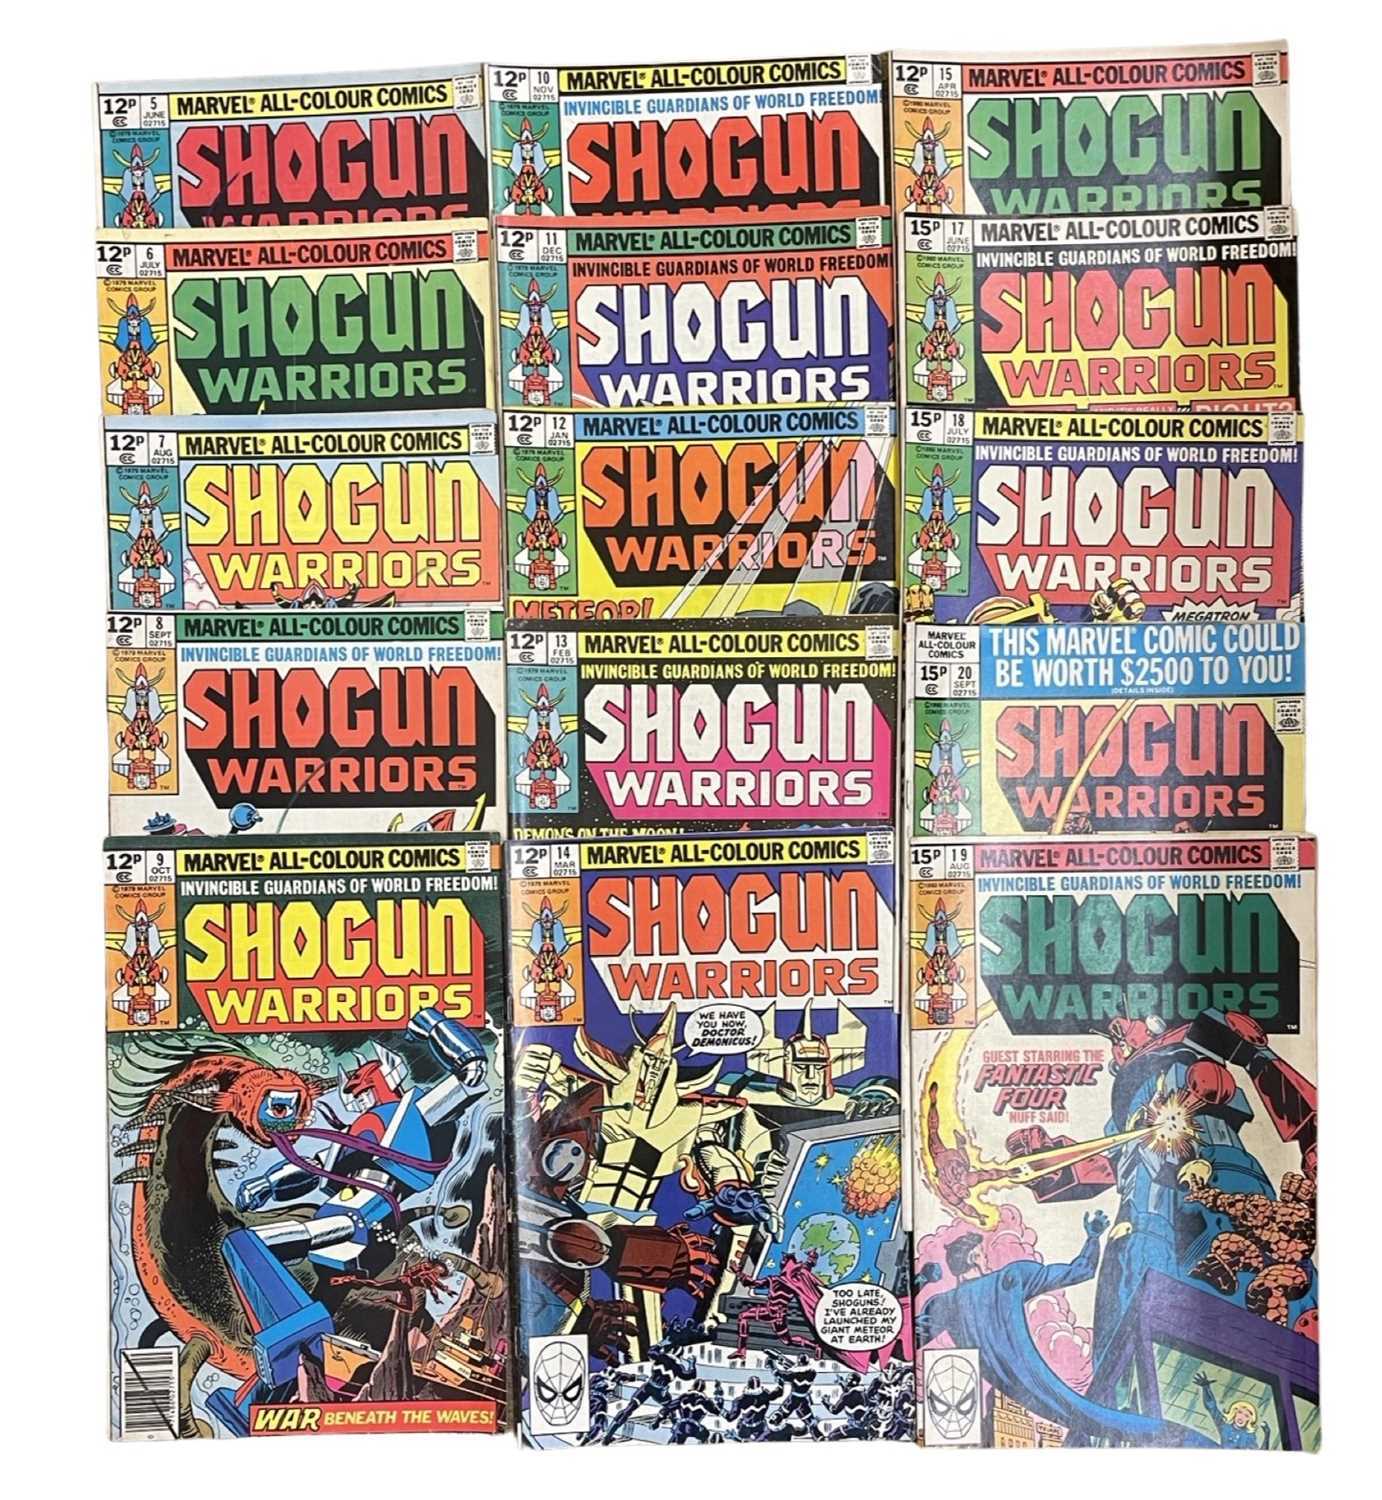 A collection of 1979 Shogun Warriors comic books by Marvel. Issues: 5-15 / 17-20